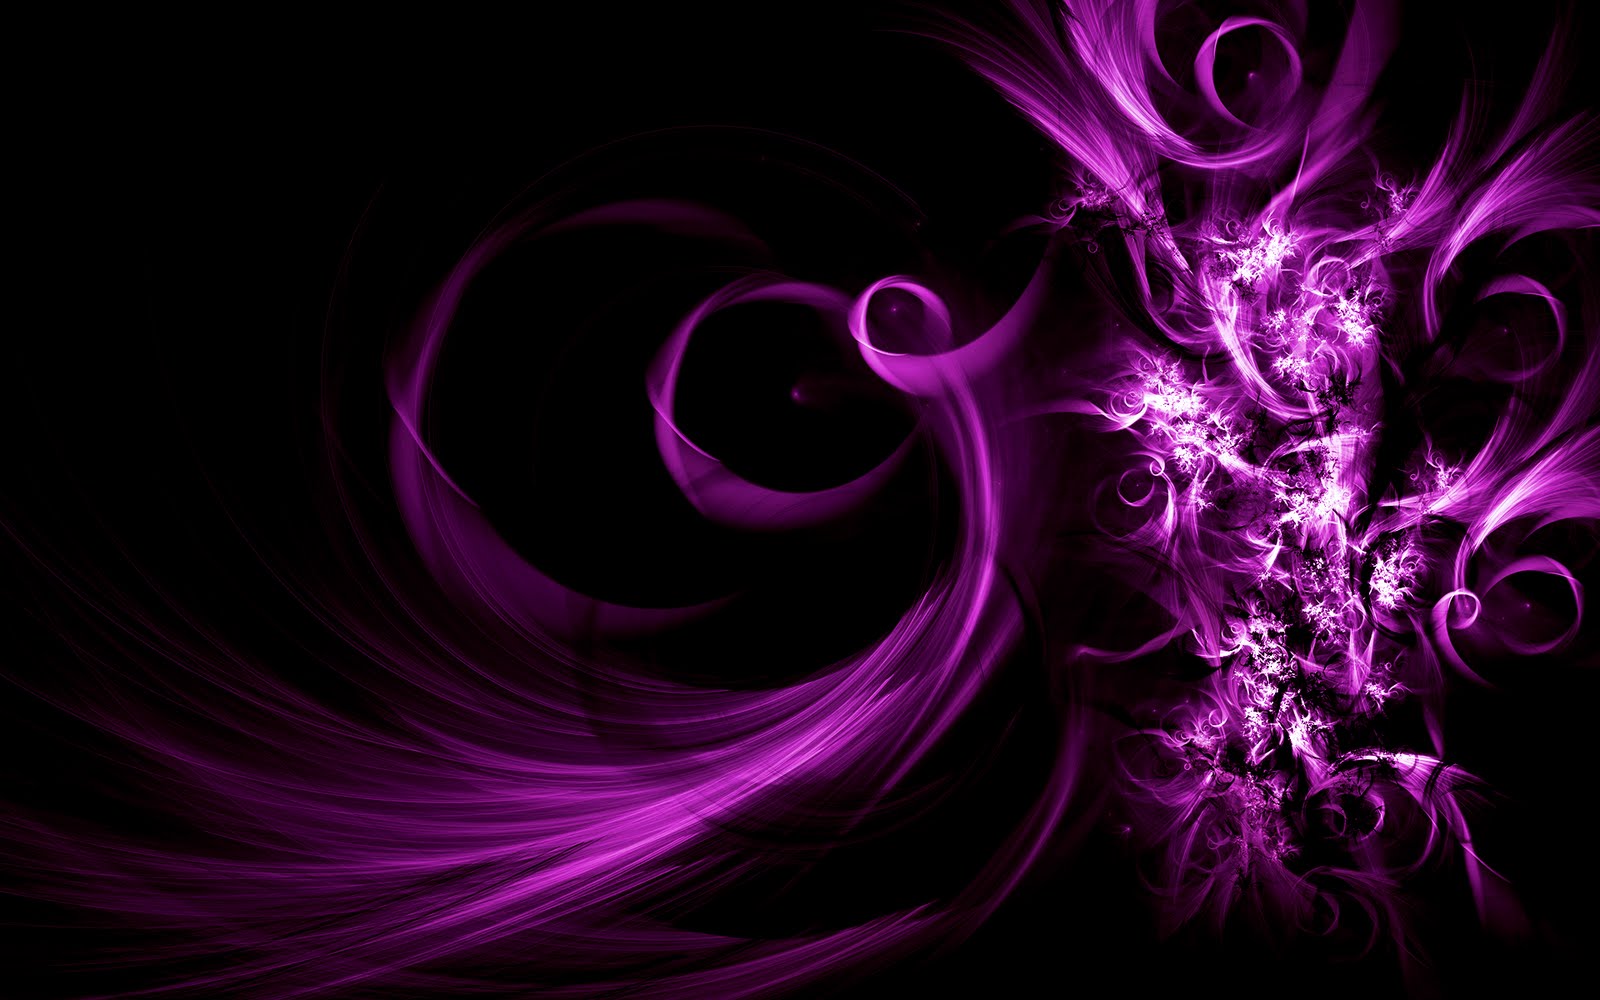 Purple Abstract Art Wallpaper 2955 Hd Wallpapers in Abstract